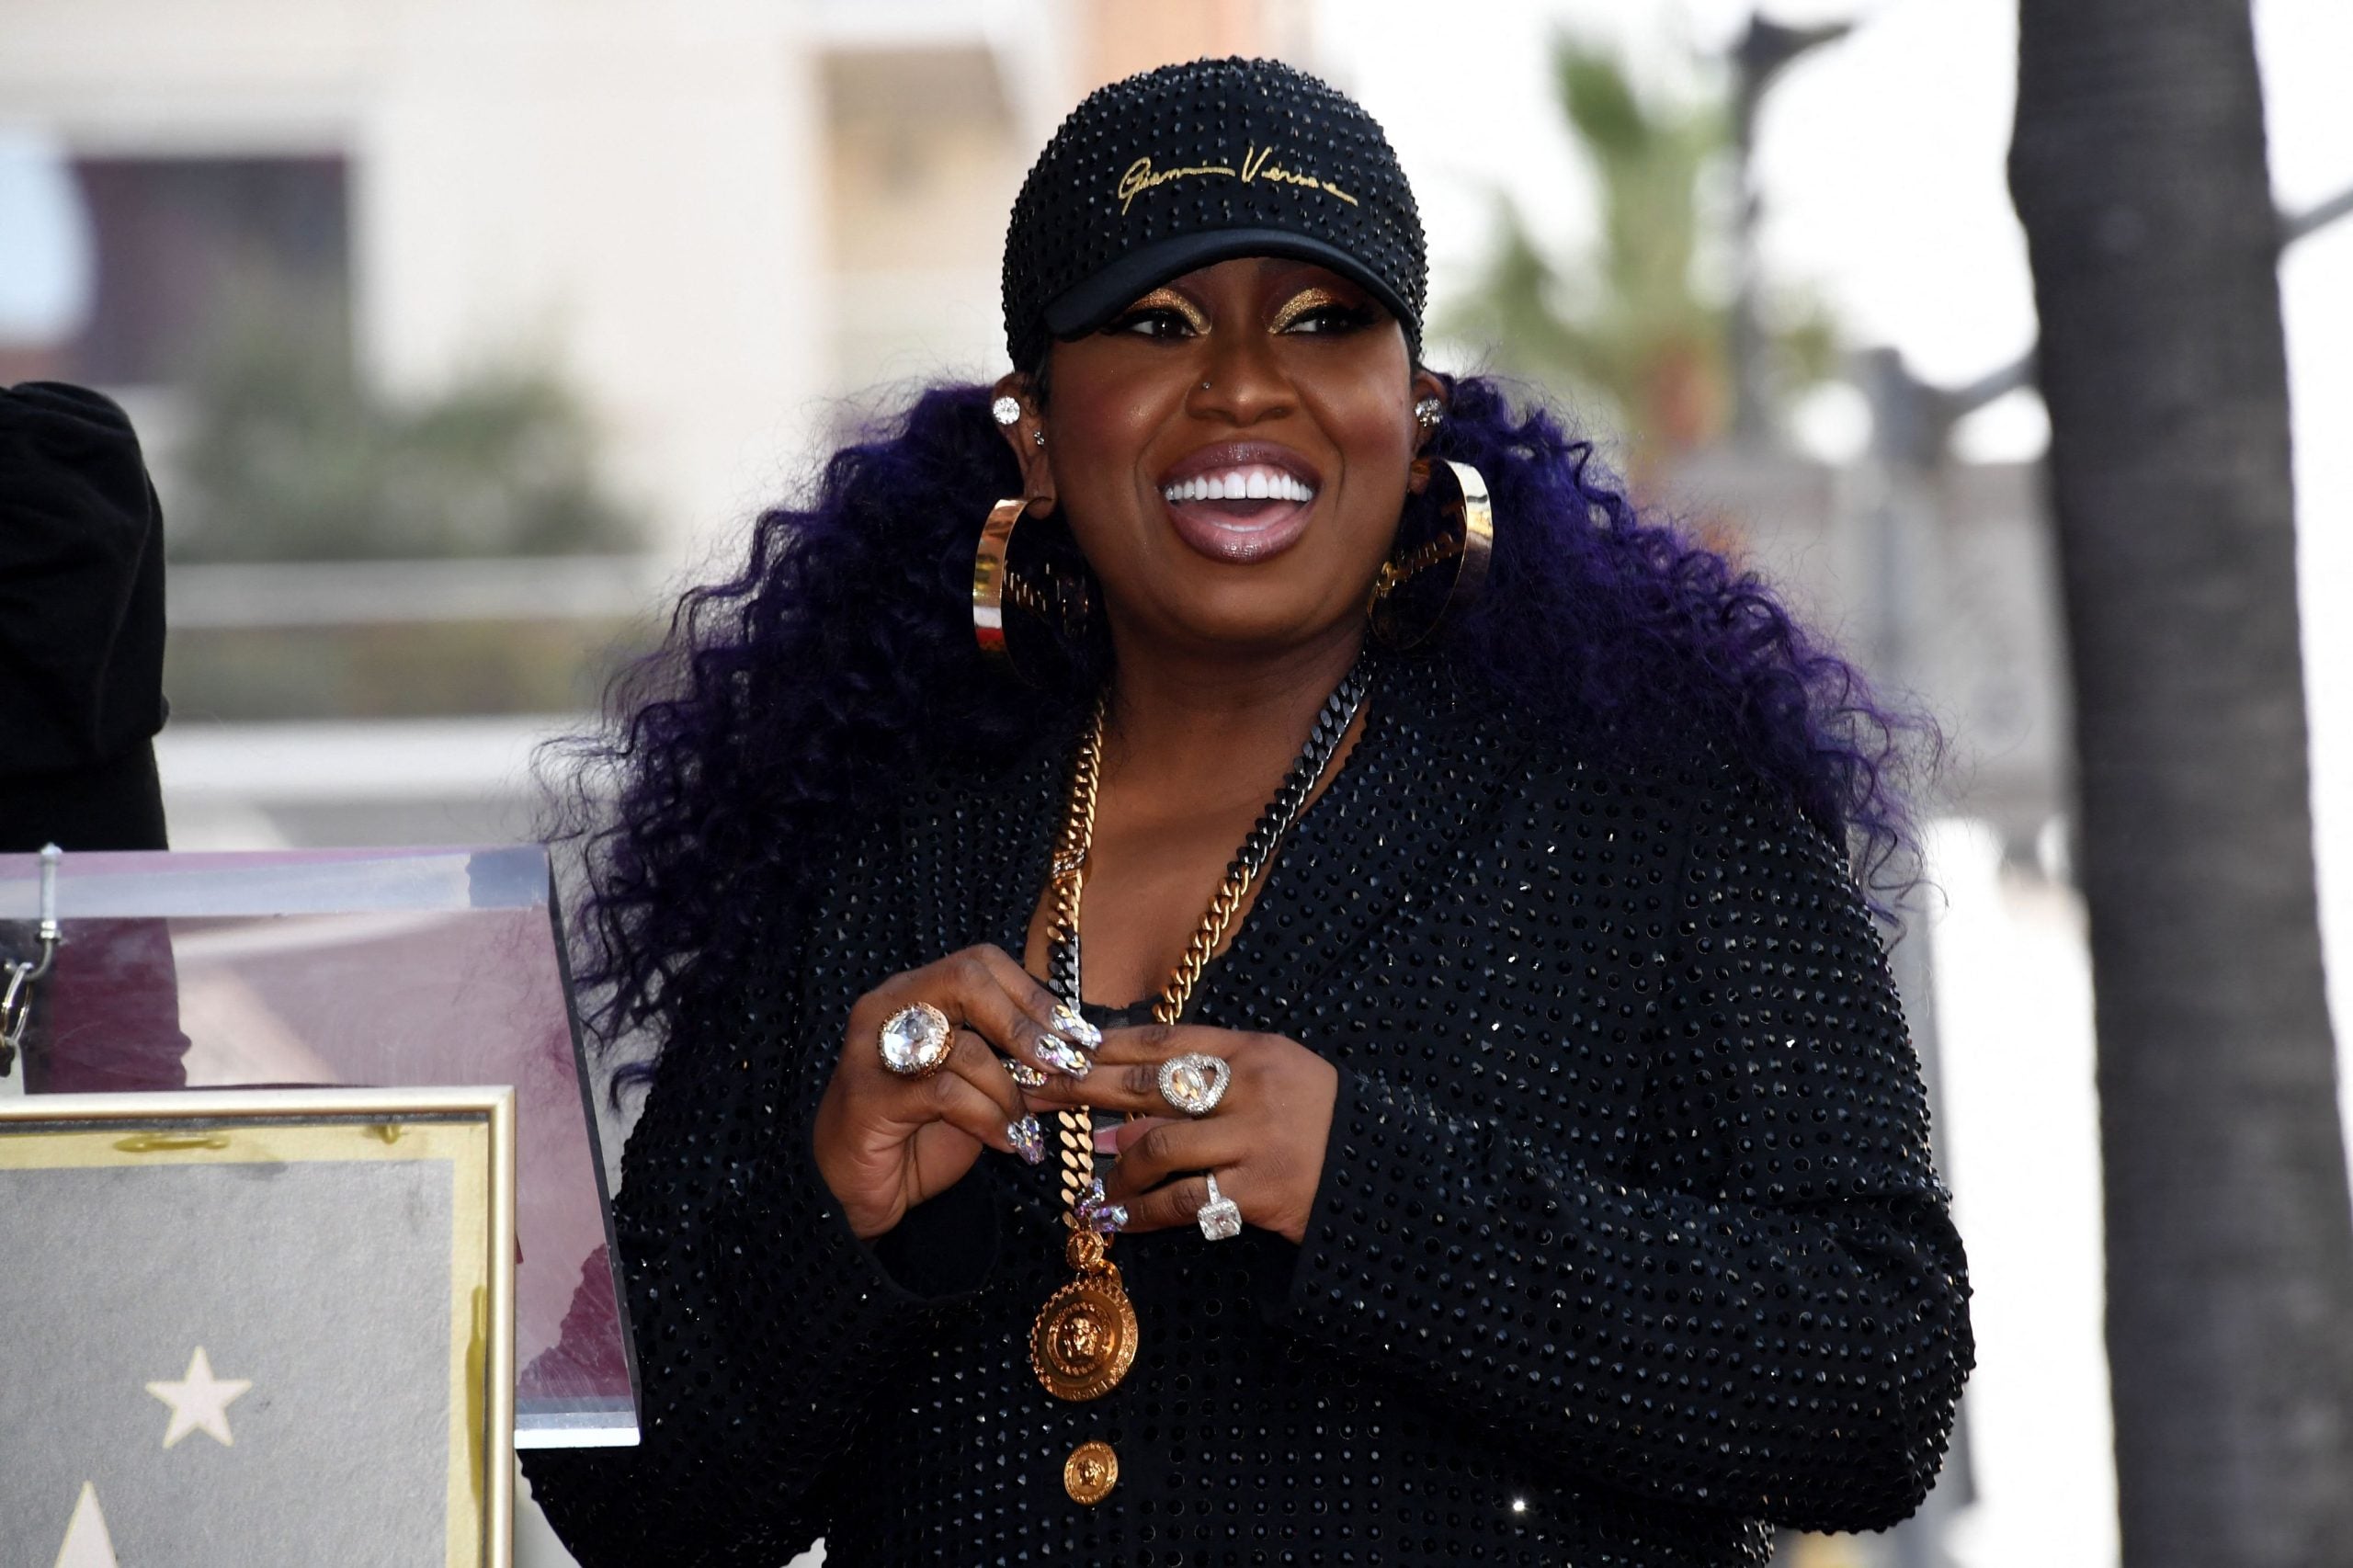 Missy Elliott Is The First Female Hip-Hop Artist To Receive A Nomination To The Rock & Roll Hall Of Fame